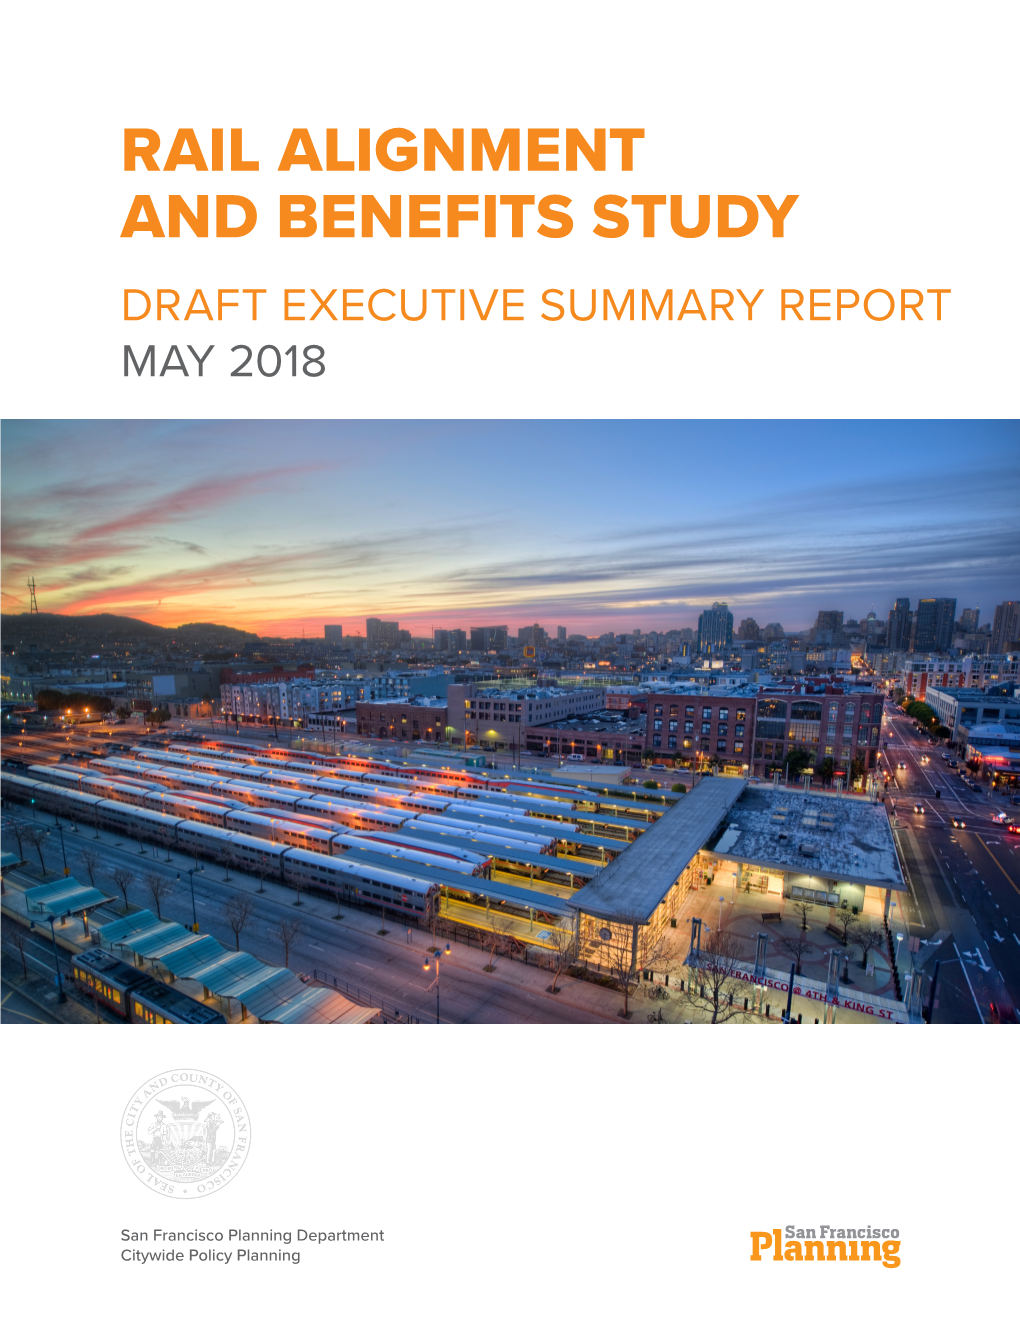 Rail Alignment and Benefits Study Draft Executive Summary Report May 2018